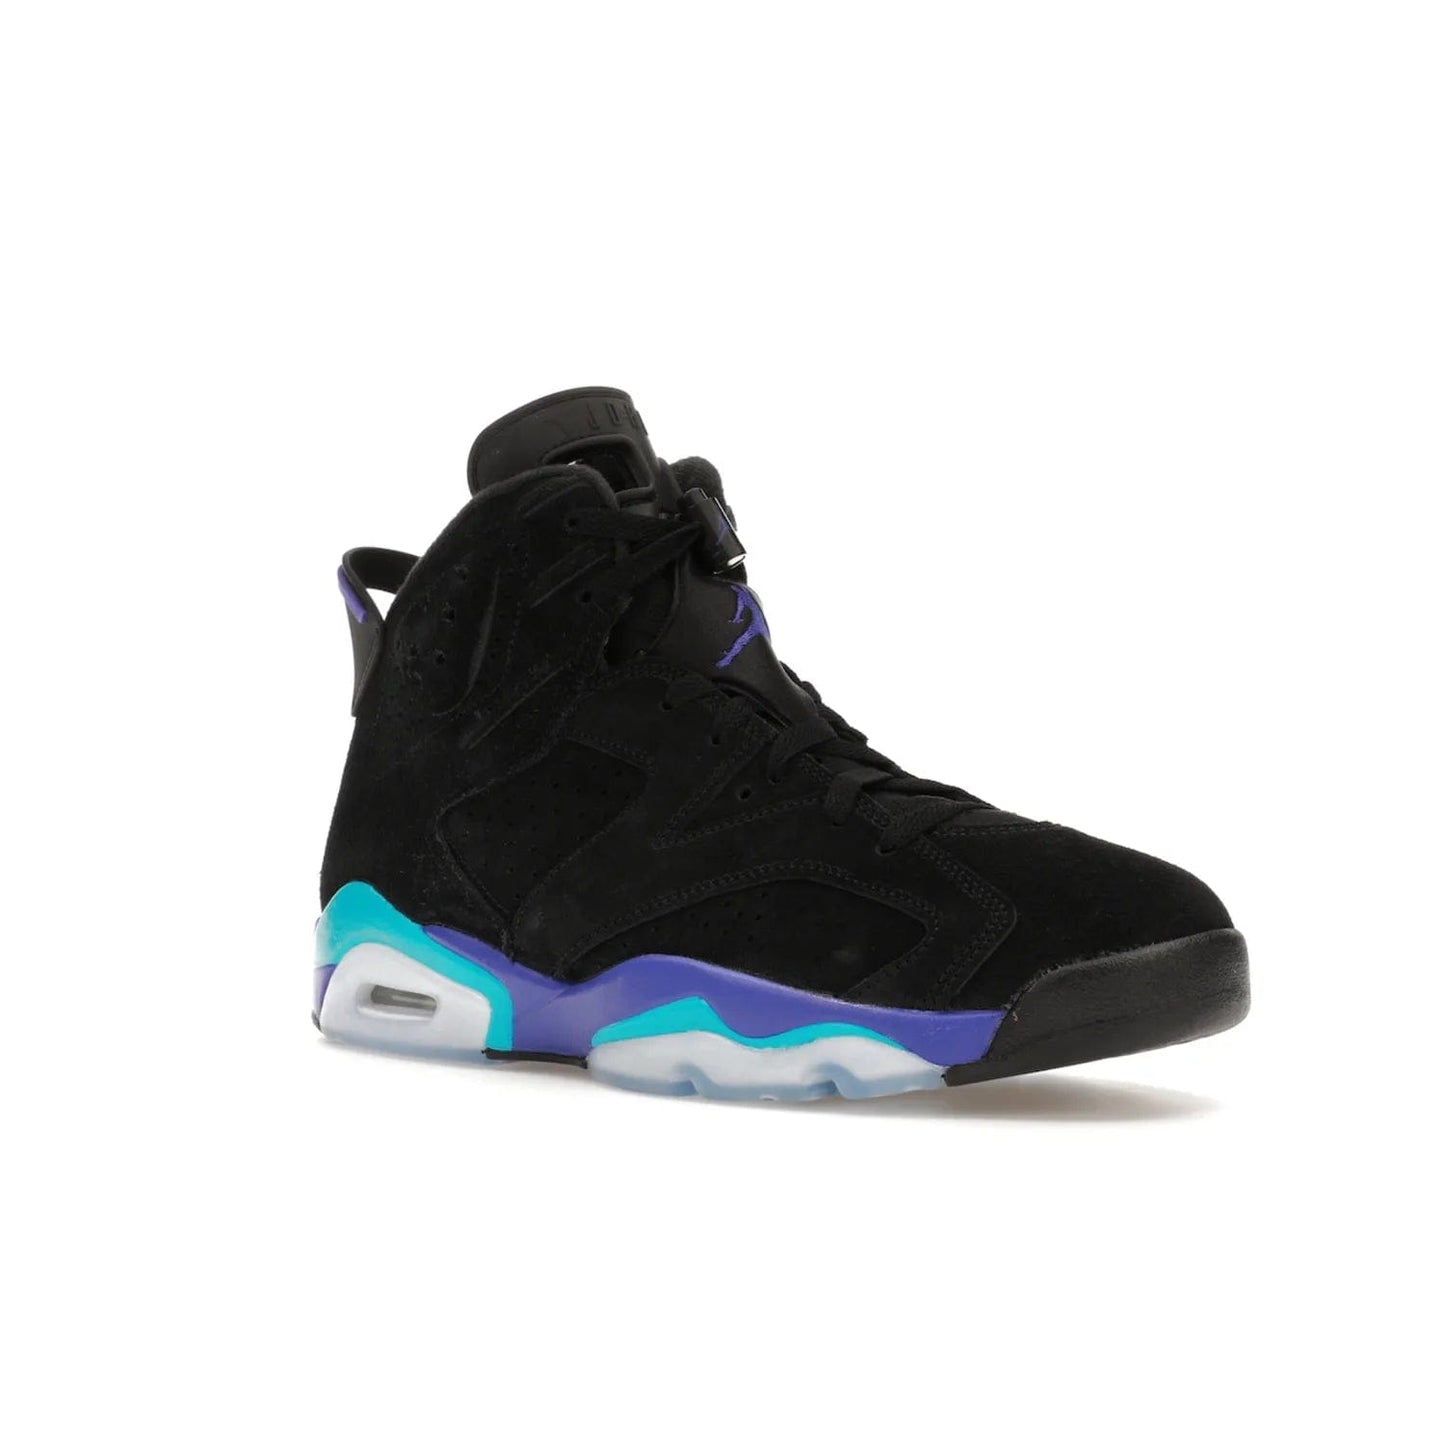 Jordan 6 Retro Aqua - Image 5 - Only at www.BallersClubKickz.com - Feel the classic Jordan 6 Retro Aqua paired with modern style. Black, Bright Concord, and Aquatone hues are crafted with a supple suede and rubberized heel tab. This standout sneaker adds signature Jordan elements at $200. Elevate your style with the Jordan 6 Retro Aqua.